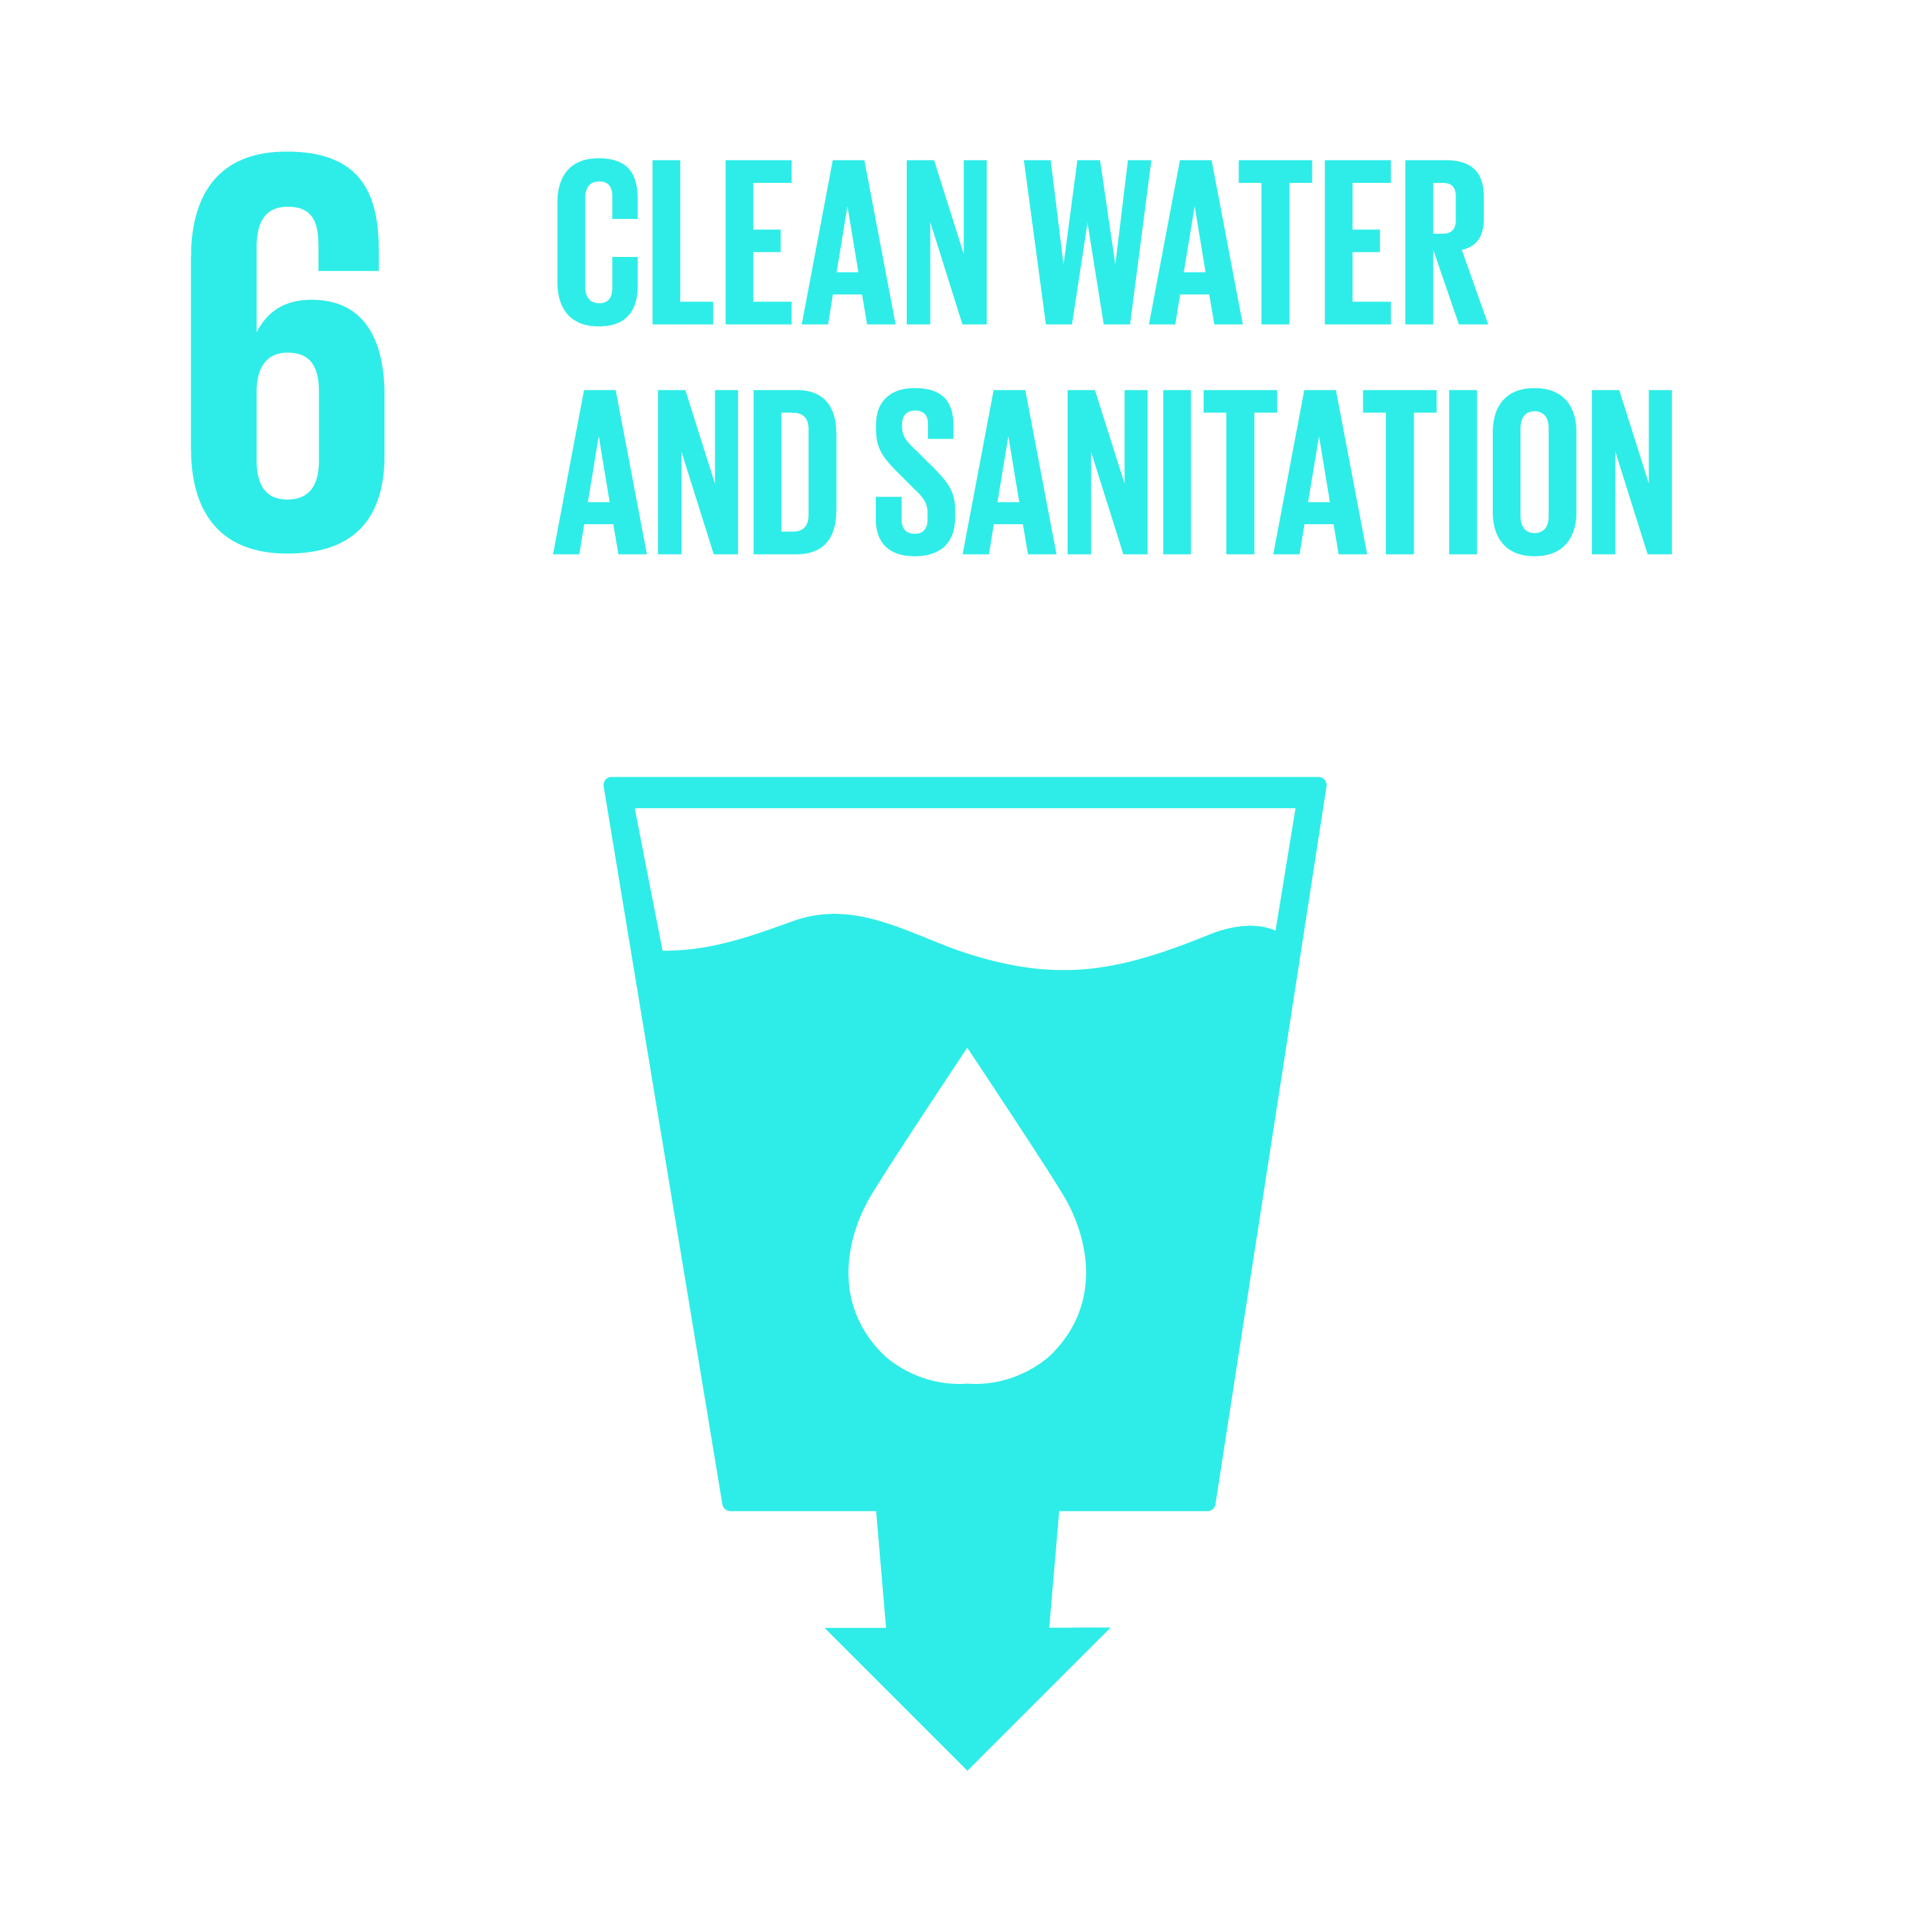 Sustainable development goals: Clean water and sanitation